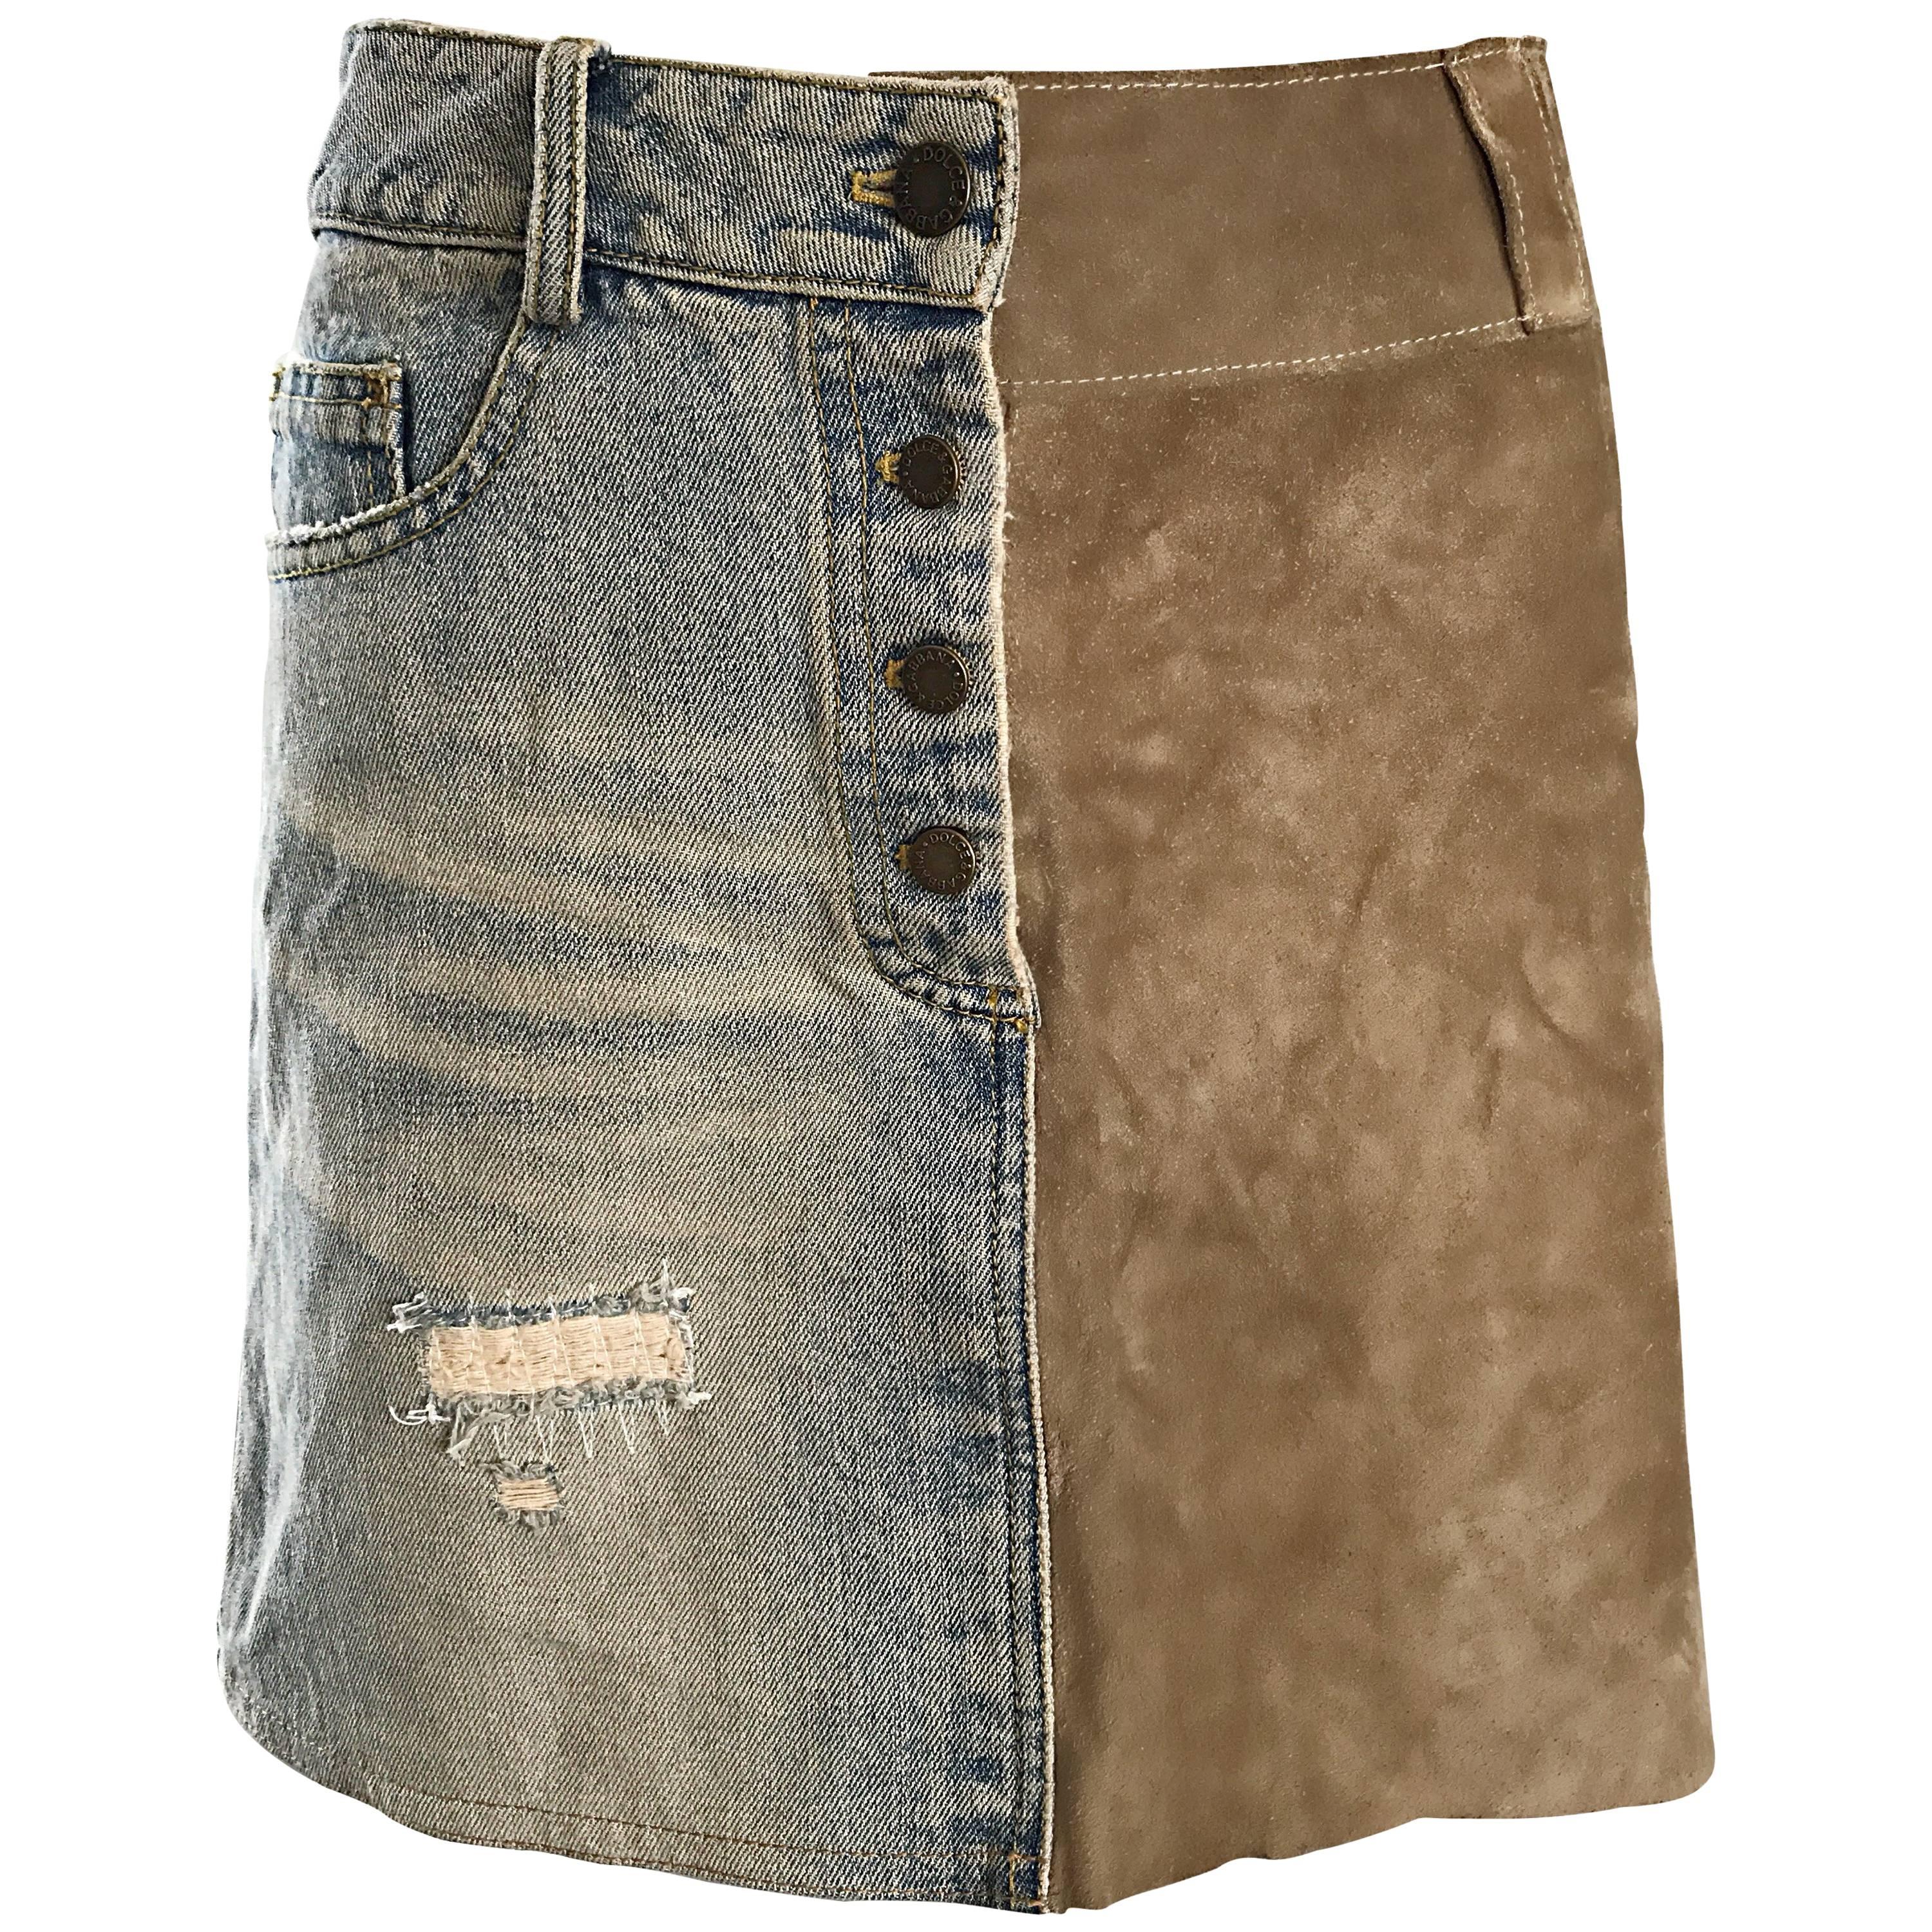 1990s Dolce and Gabbana Denim + Suede Leather 90s Vintage Distressed Mini Skirt